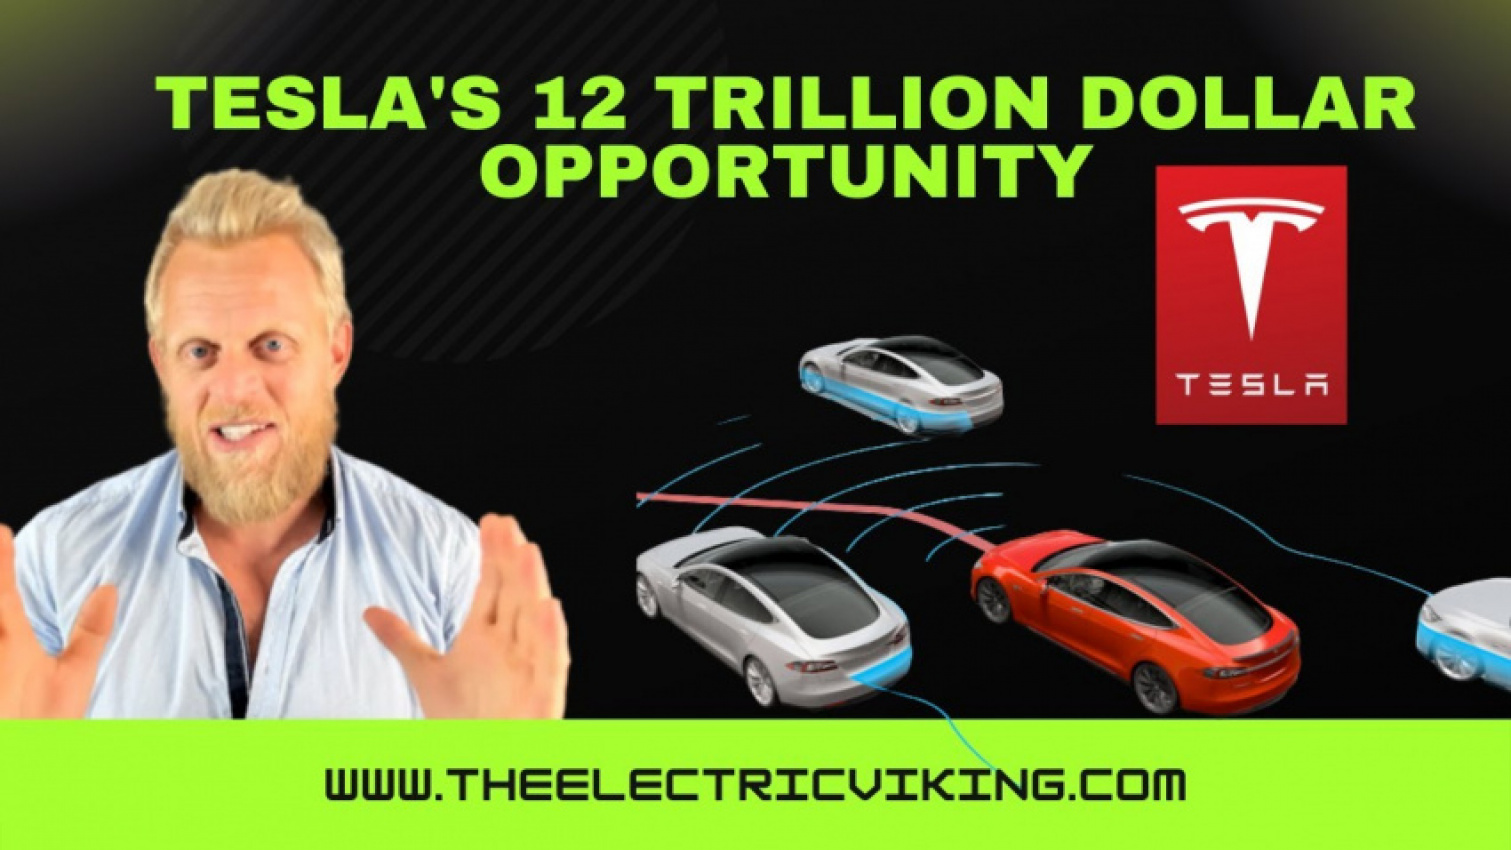 autos, cars, oppo, tesla, cost of owning a tesla, electriccars, electricfuture, electricvehicles, tesla's 12 trillion dollar opportunity